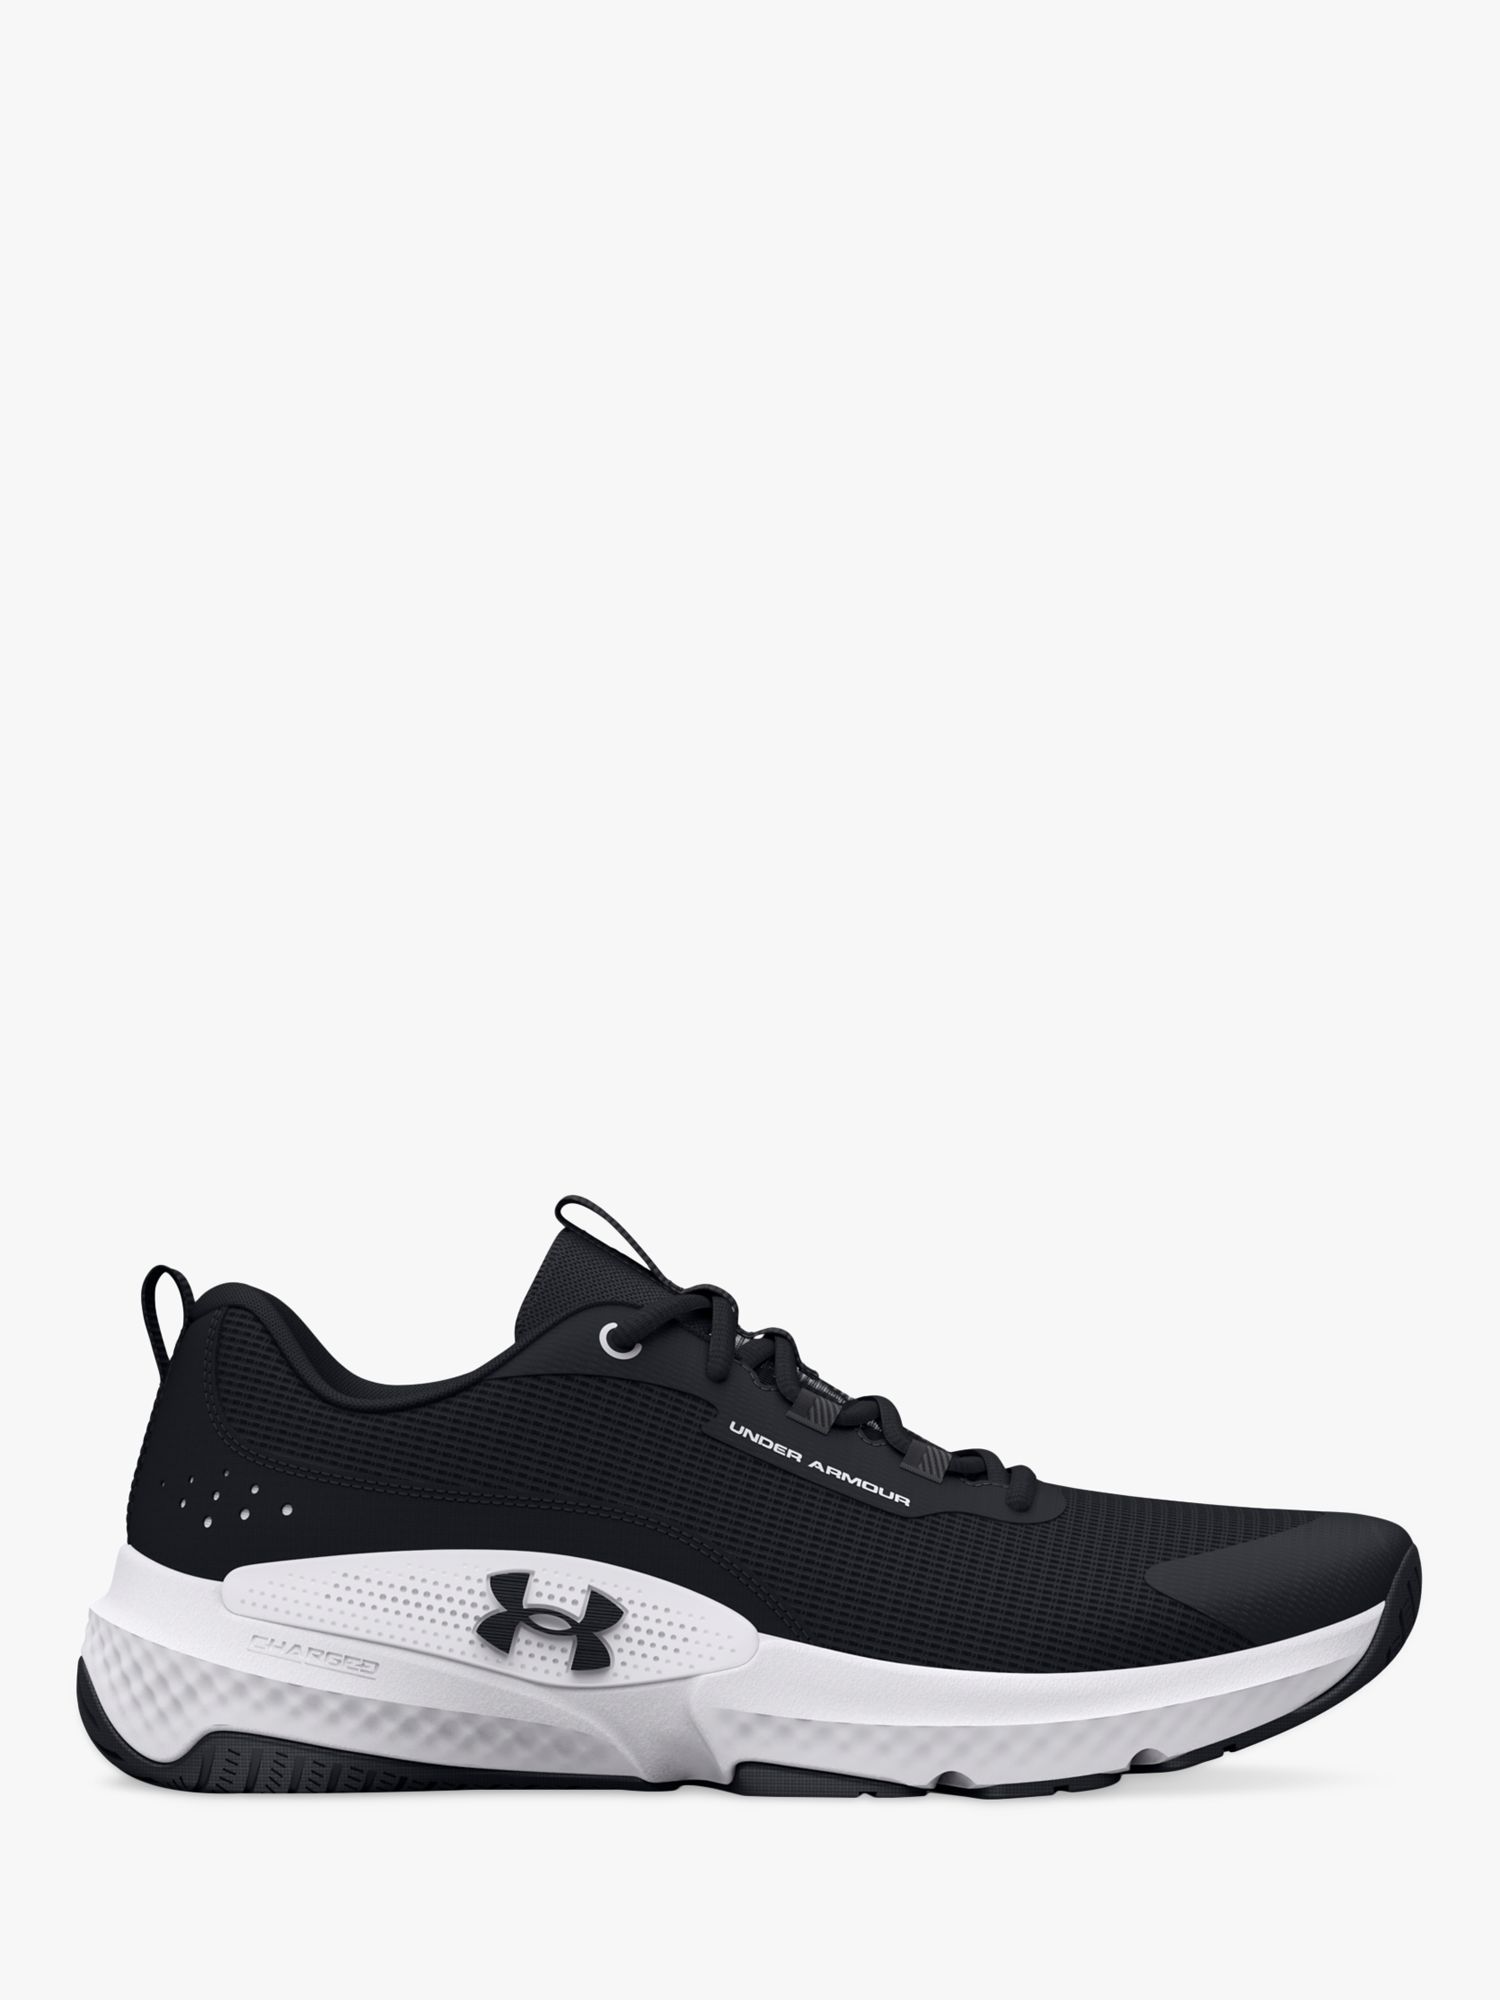 Under Armour Dynamic Select Men's Cross Trainers, Black/White, 7